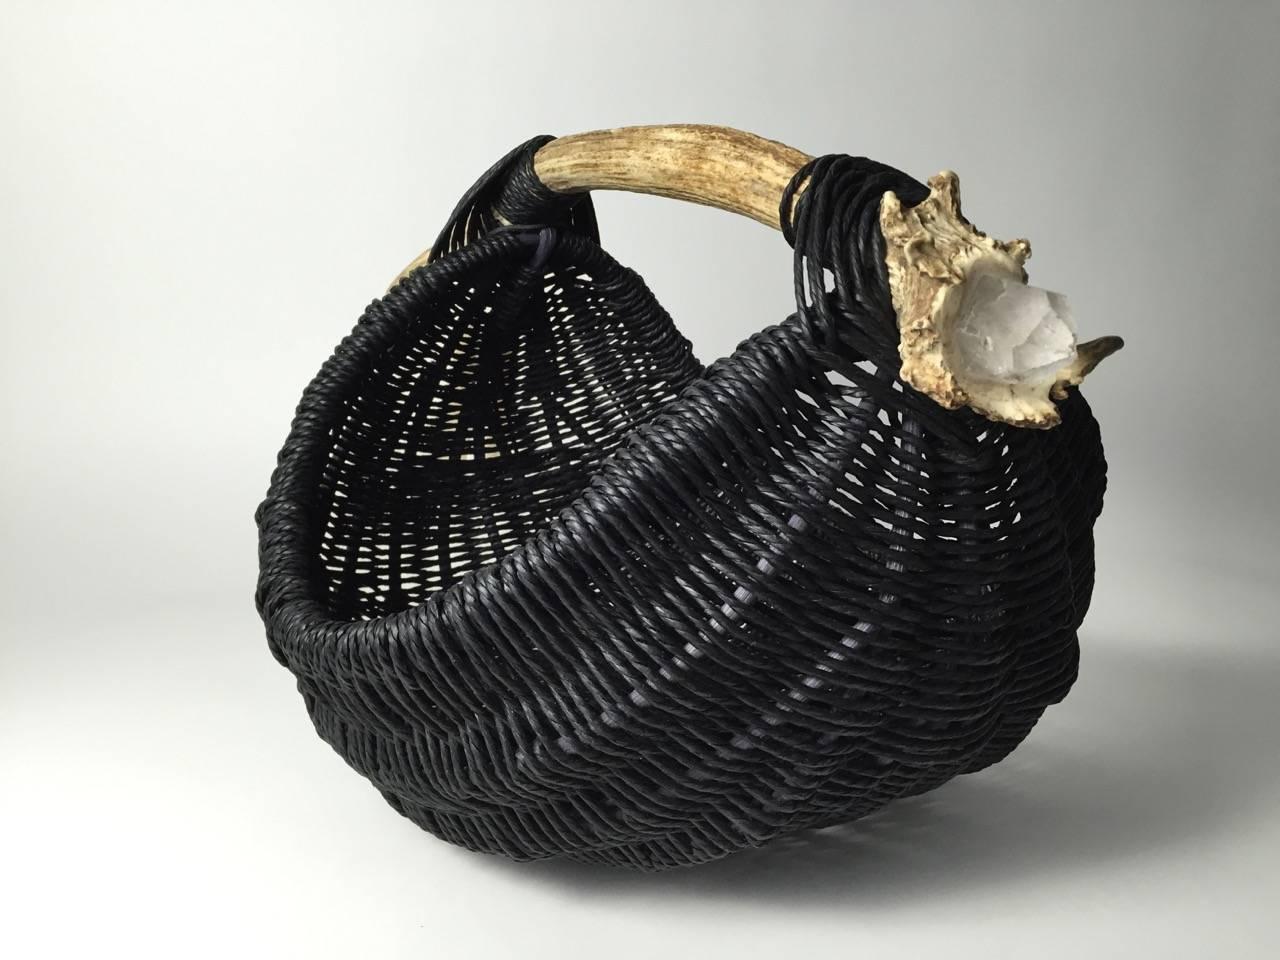 This handmade, custom basket is made with shed white tail deer antler, embedded with a raw quartz crystal, reed, black Danish wood pulp rope, leather and horse hair tassel by Los Angeles based artist and designer, Dax Savage. Having learned the art